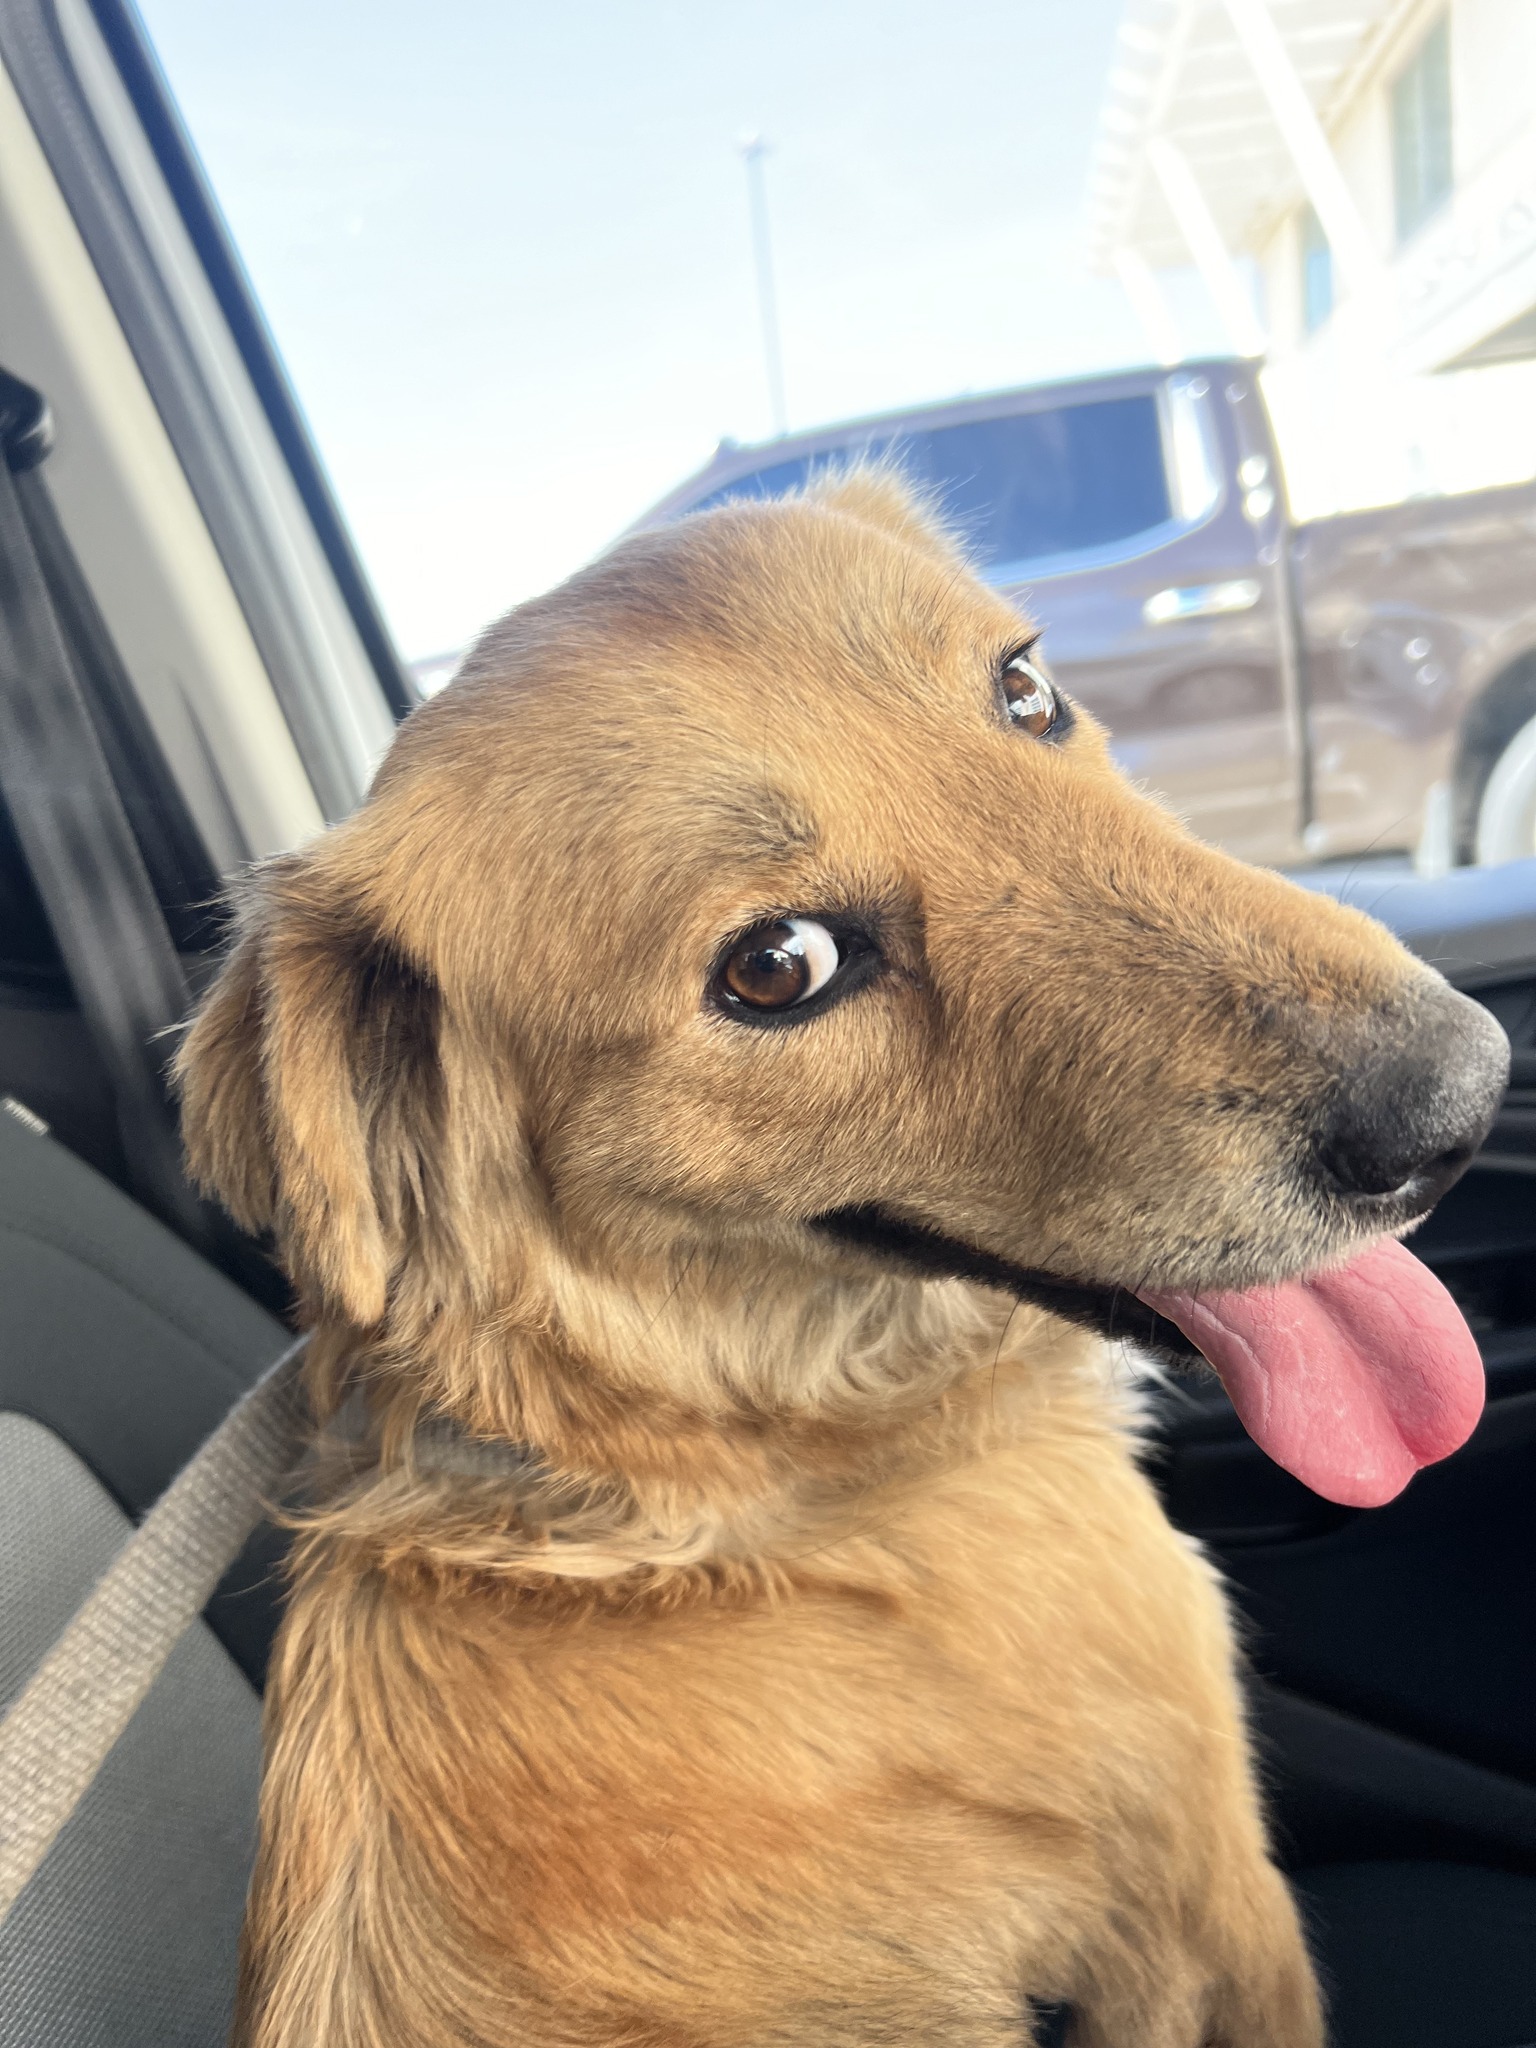 Dog with tongue out sitting in a car